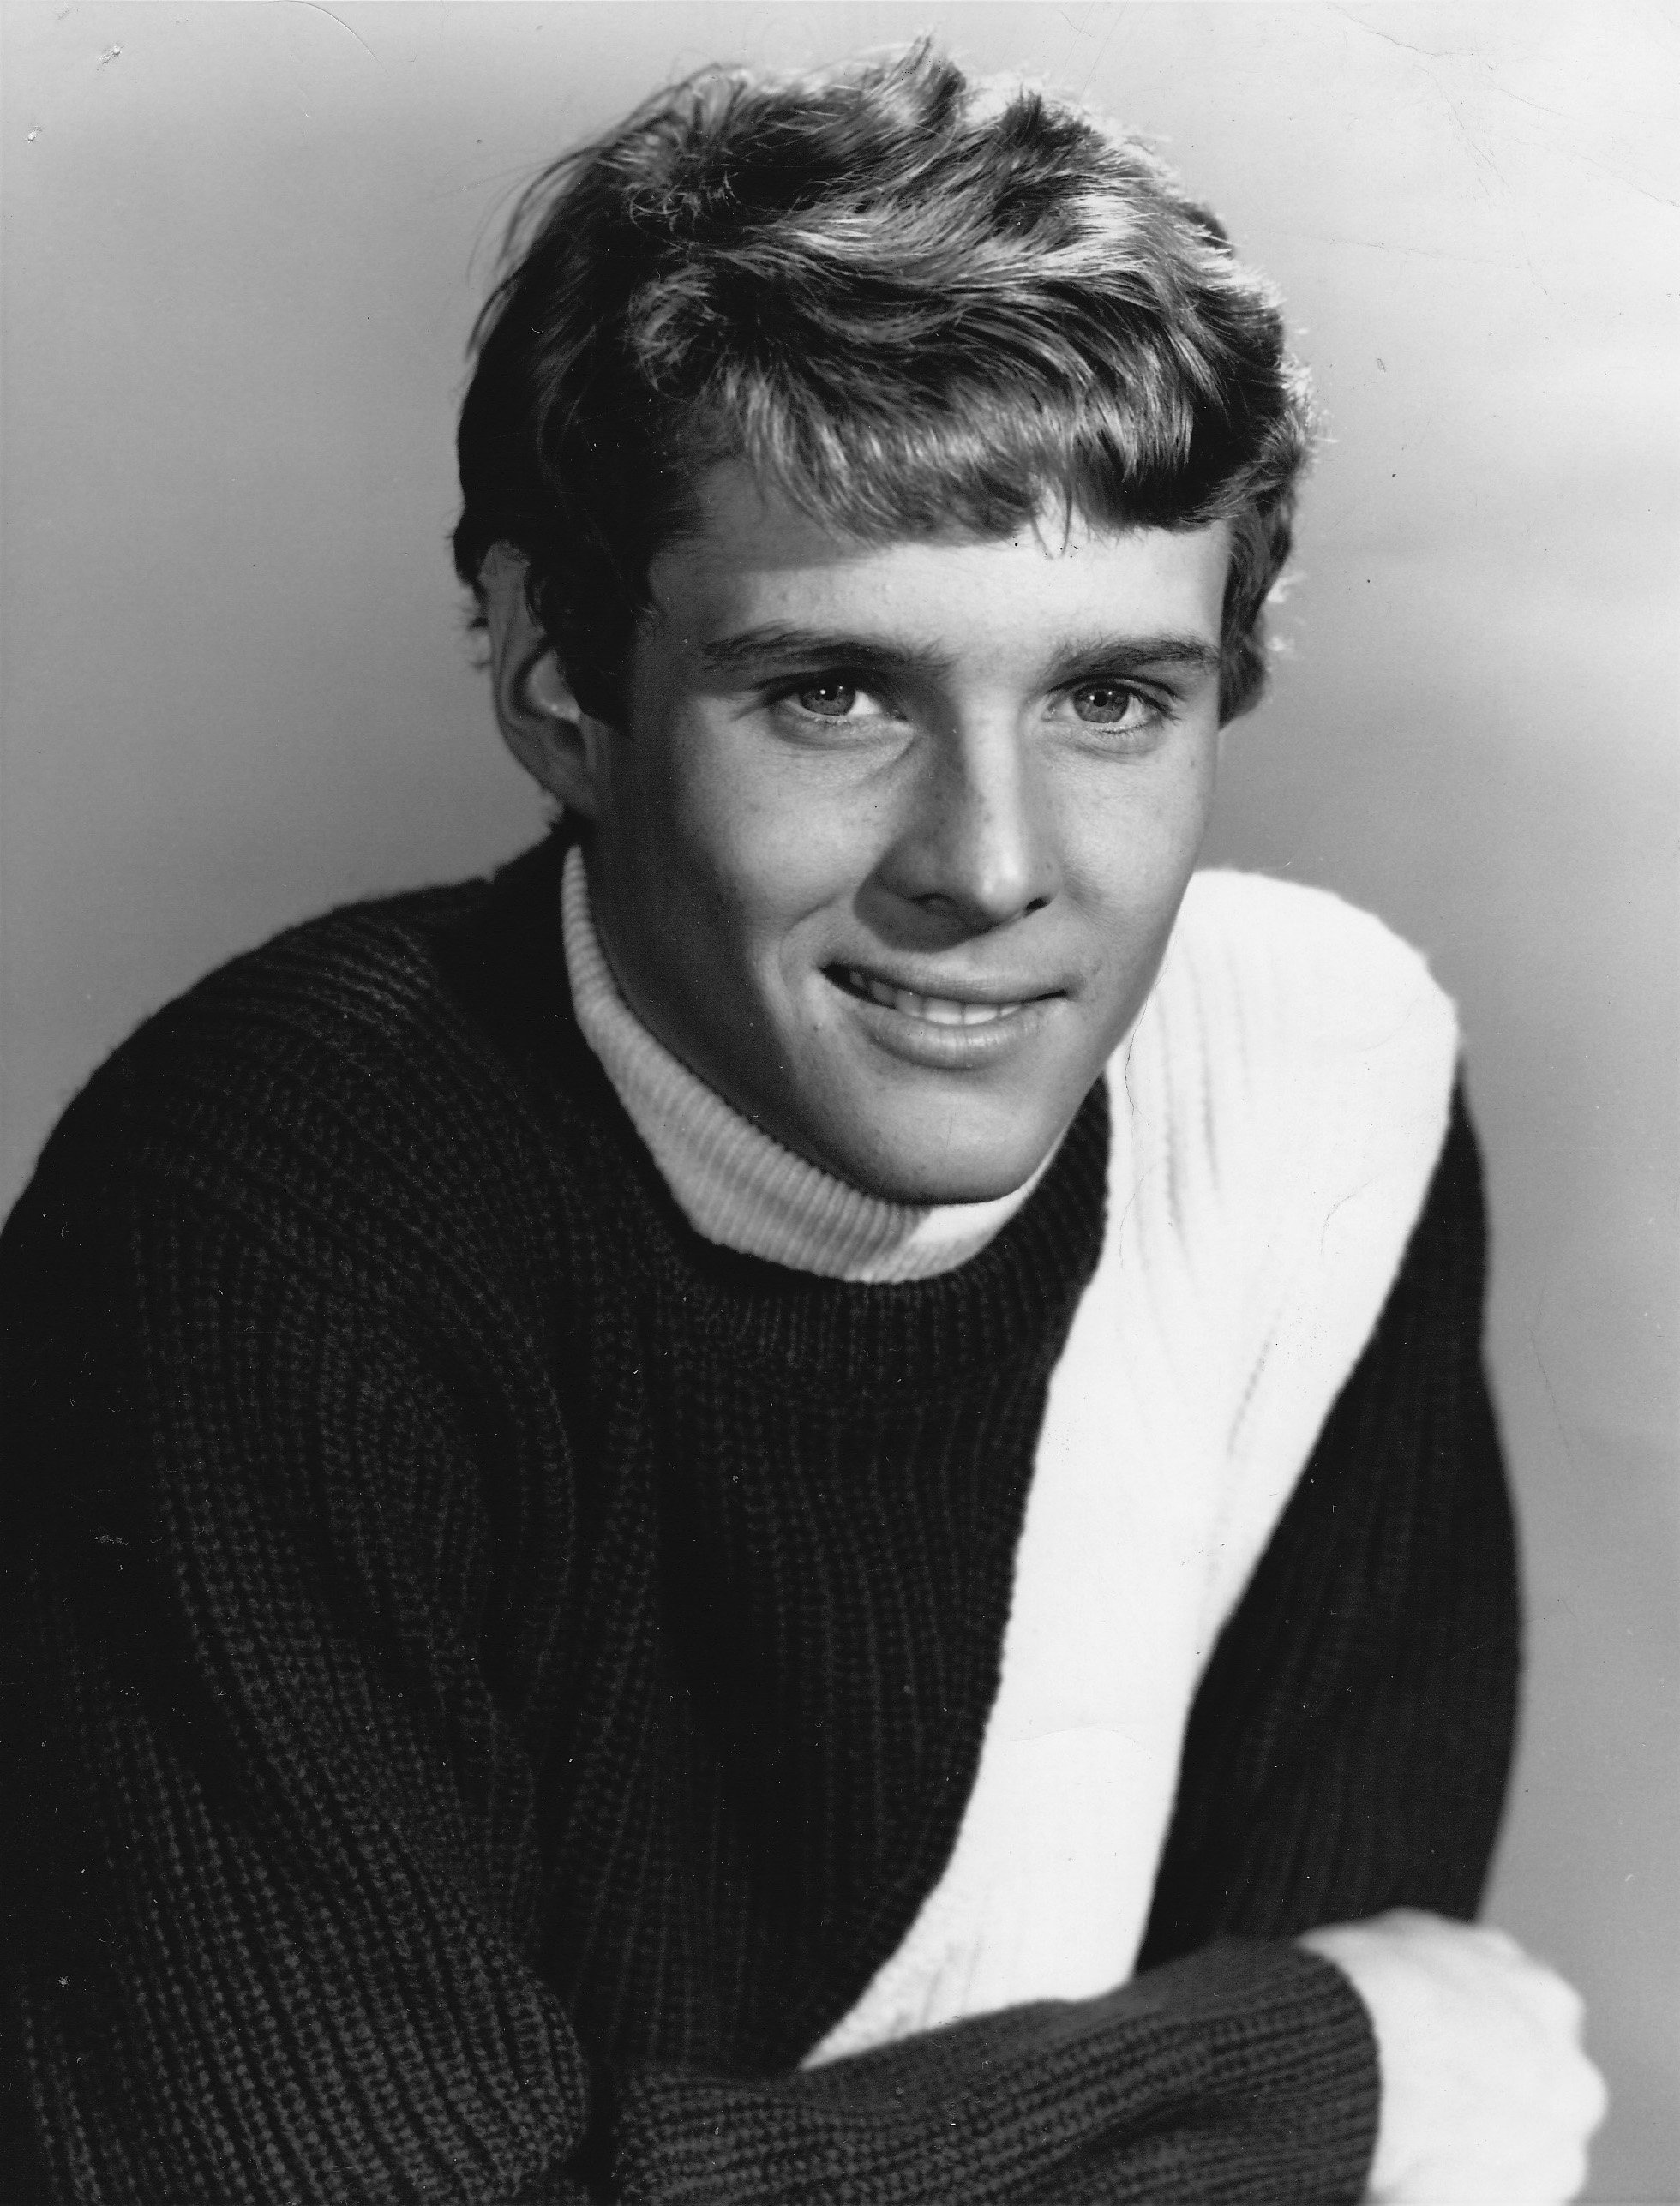 Publicity photo of Jay North promoting his starring role on the television series "Maya" | Photo: NBC Television Network / Public domain